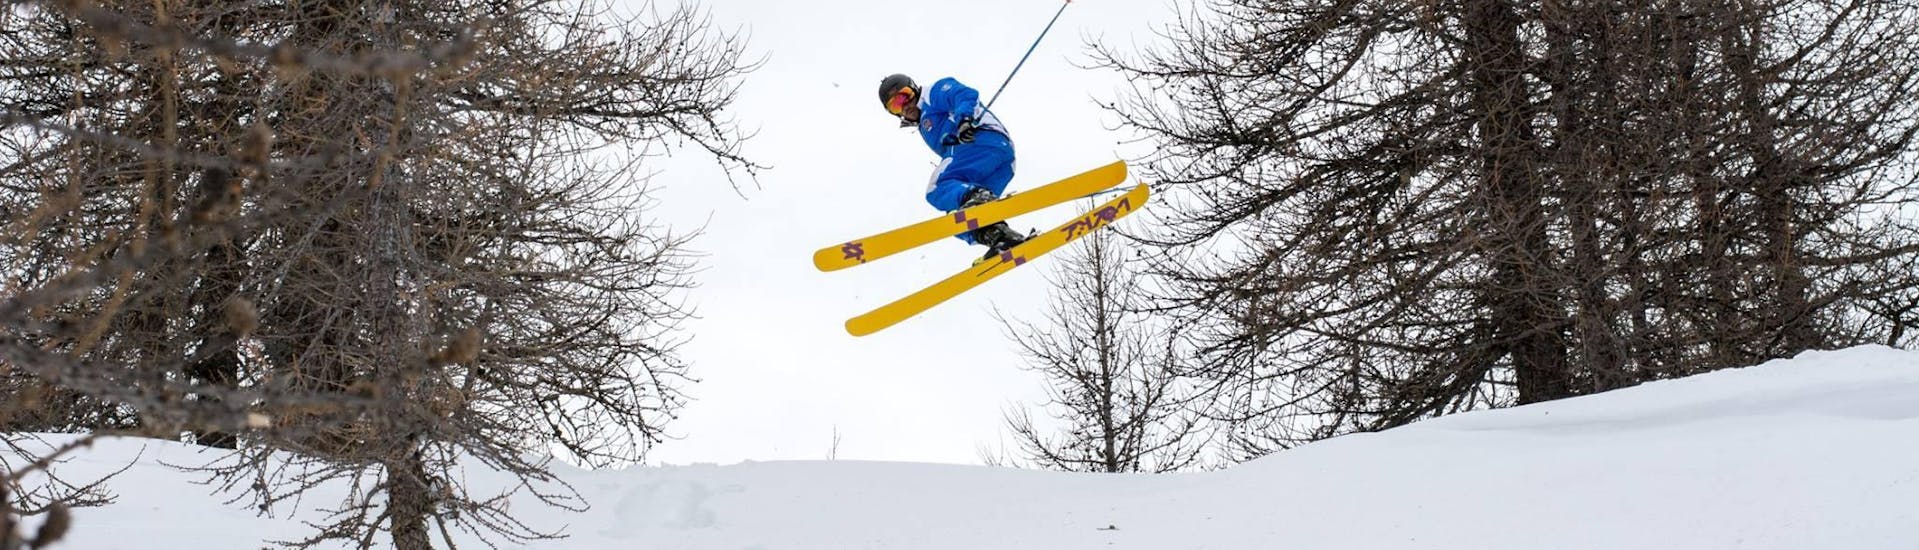 The ski instructor jumps into the air in a forest during one of the private freestyle ski lessons for all levels in Sauze d'Oulx.